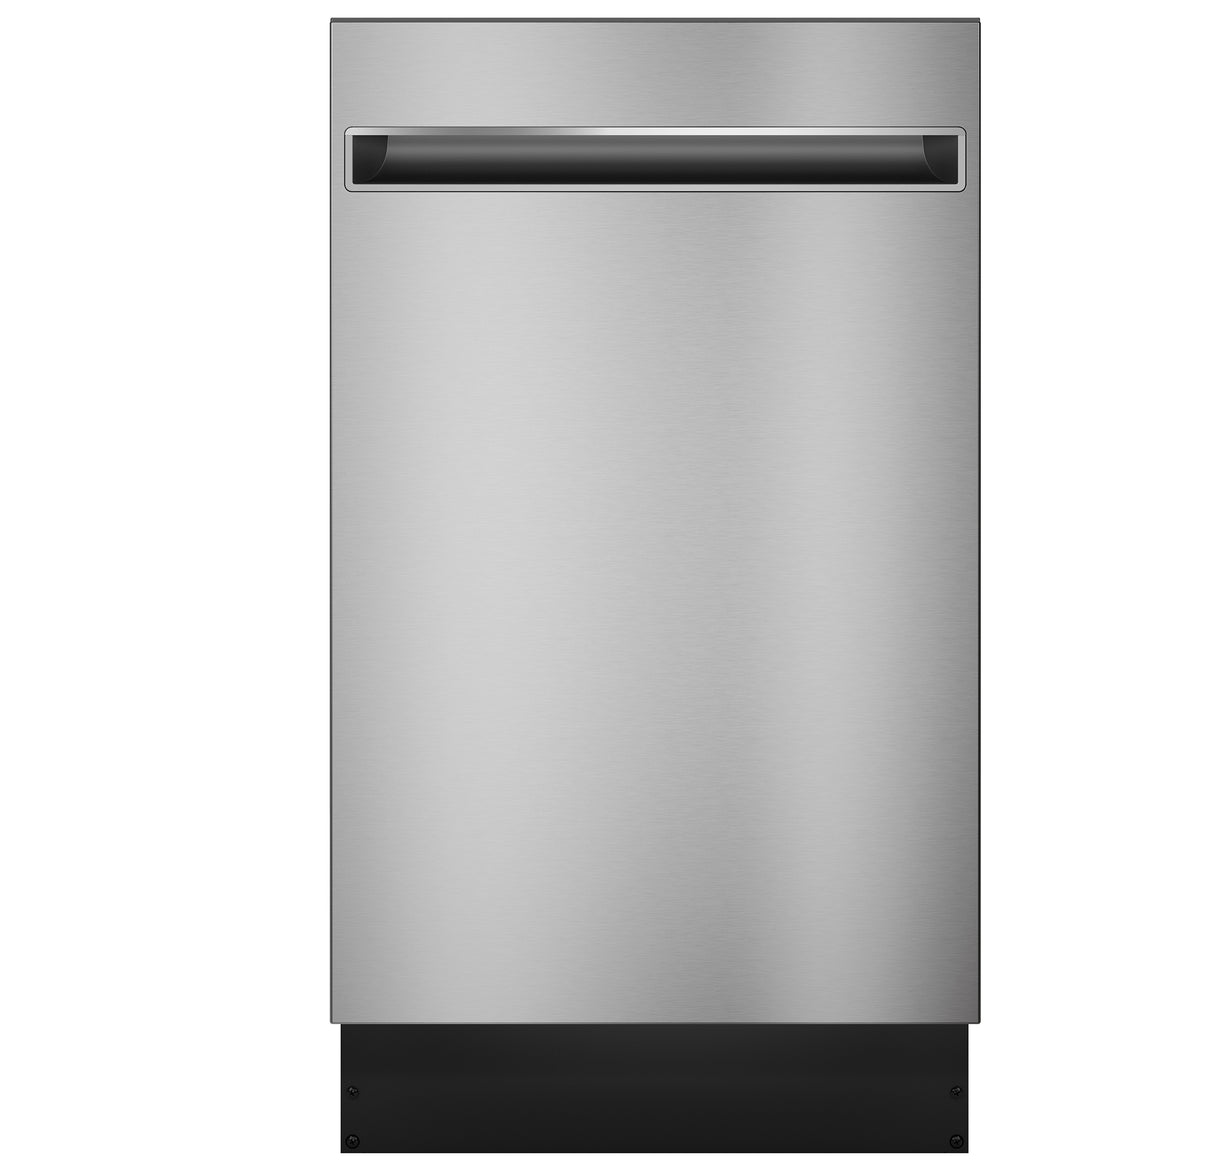 Haier 18" Stainless Steel Interior Dishwasher with Sanitize Cycle - (QDT125SSLSS)